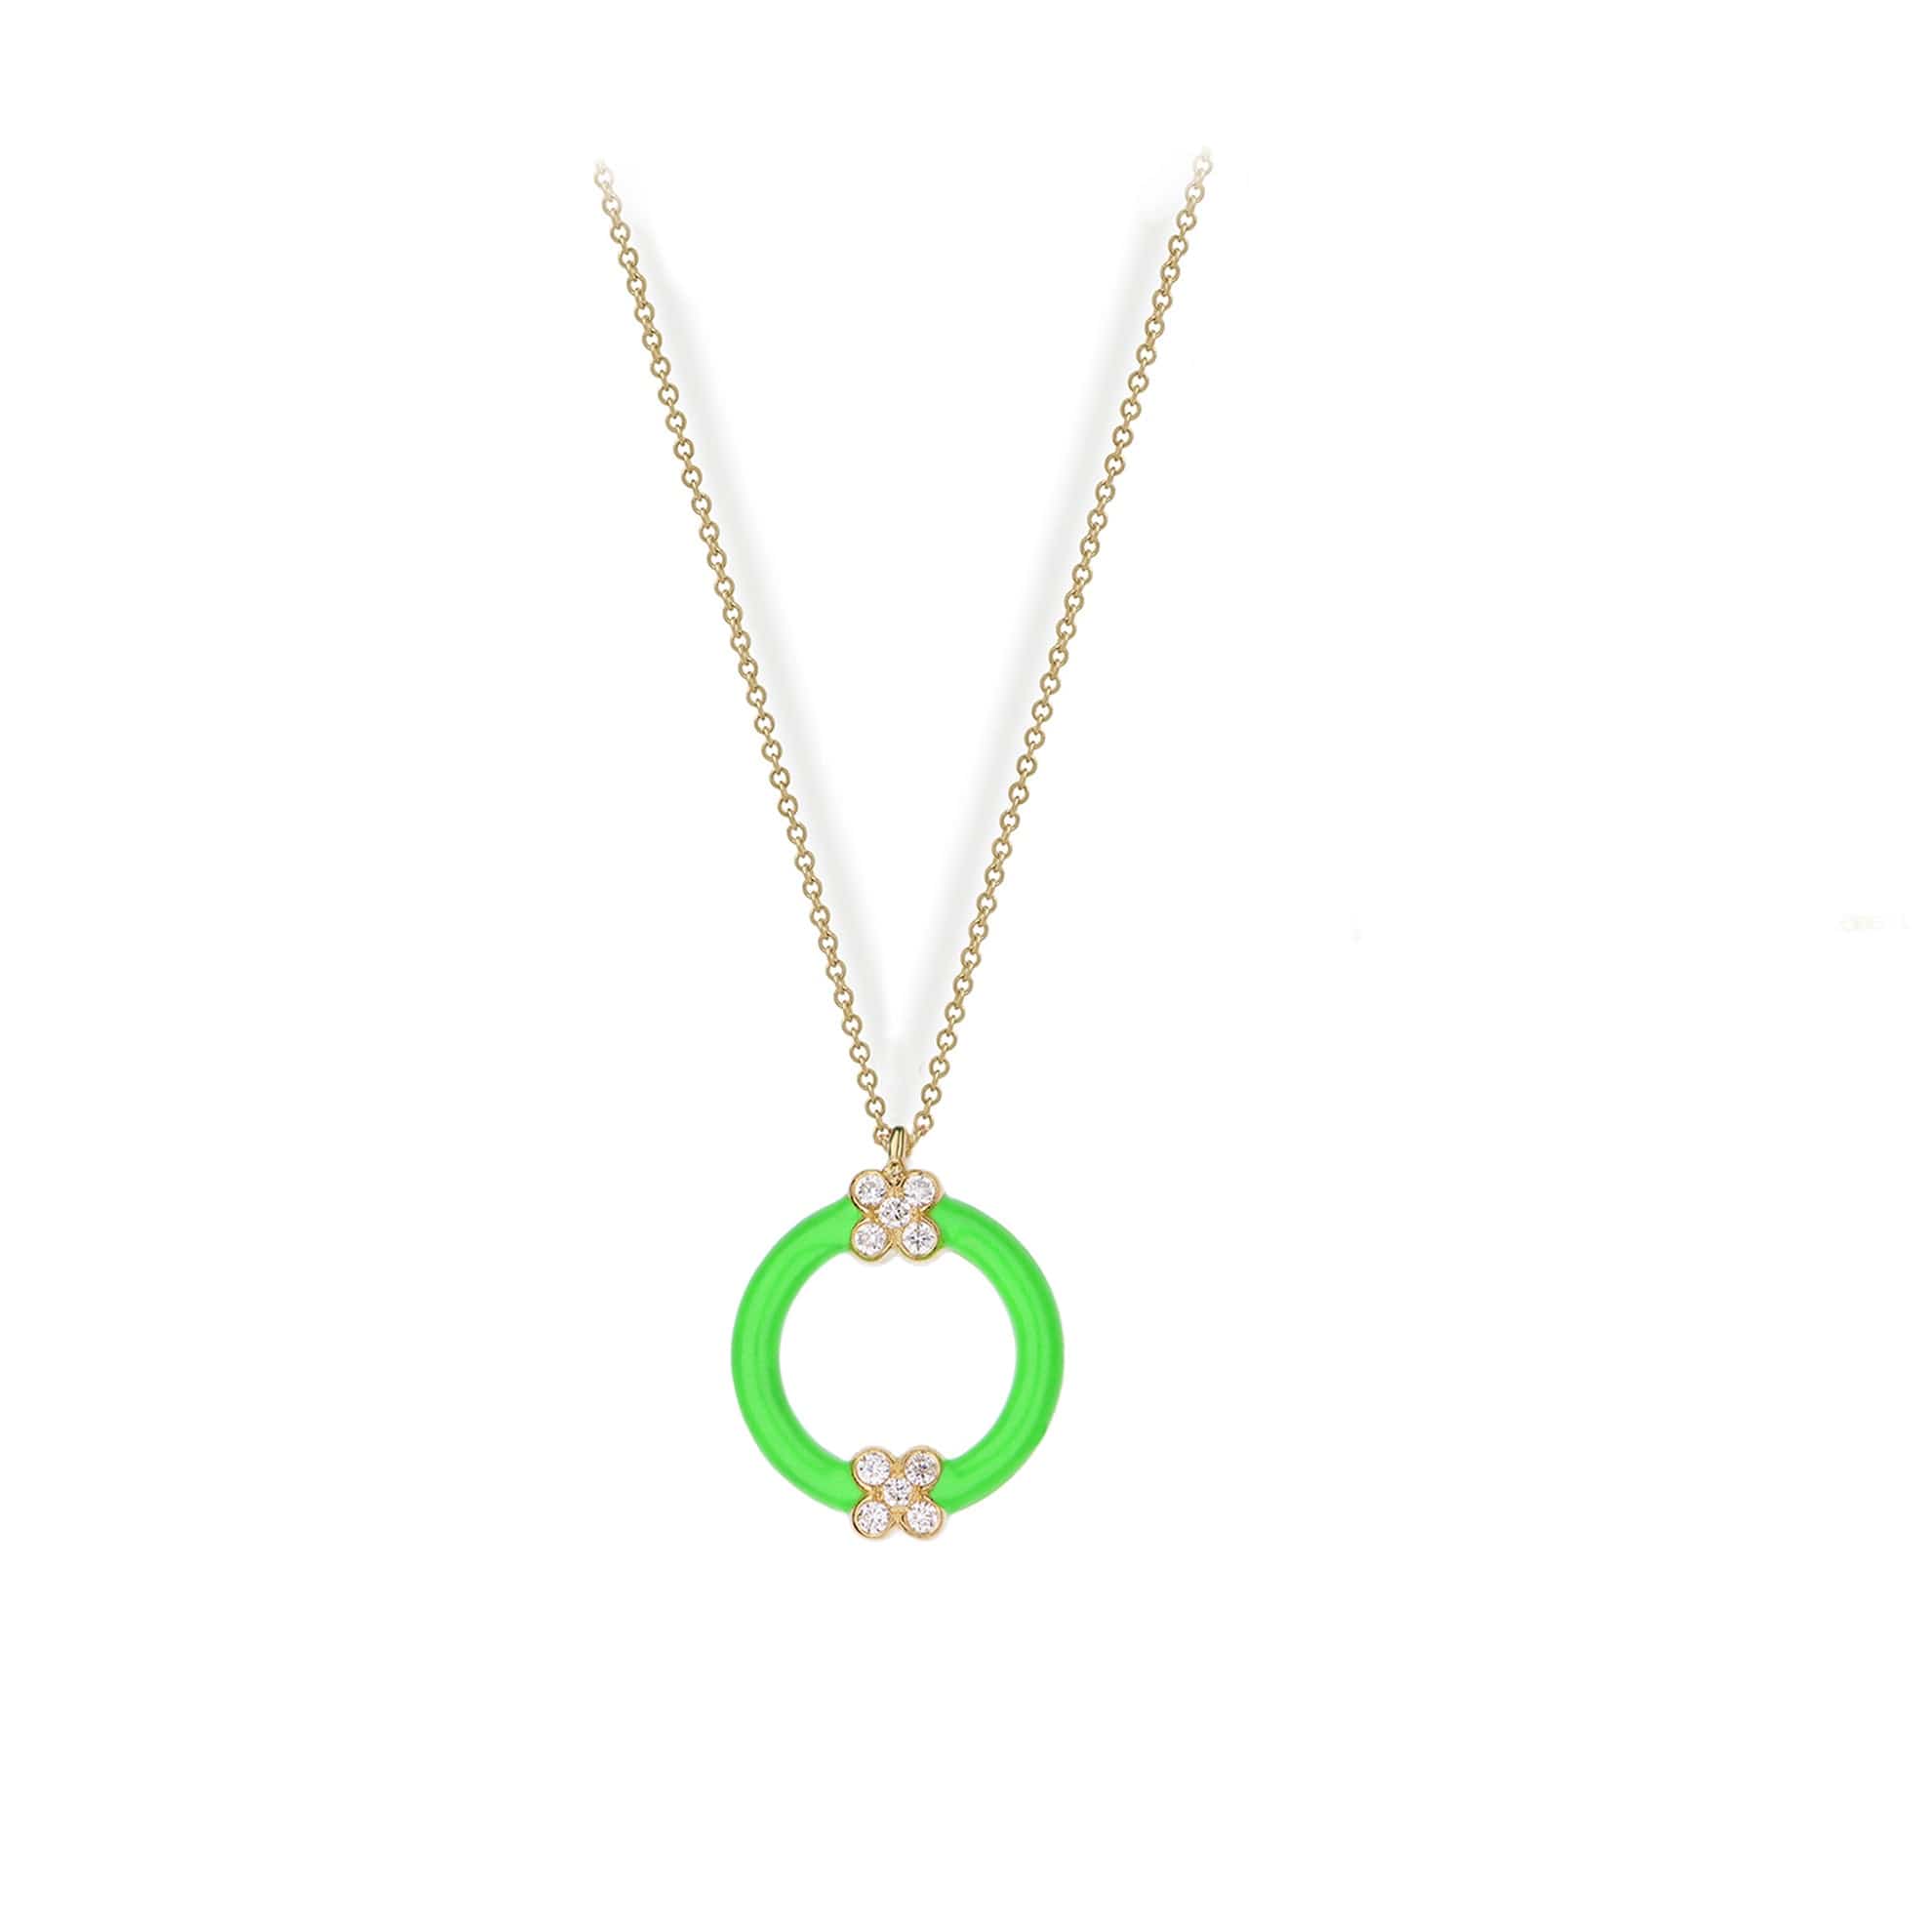 M. Fitaihi Candy Green Enamel Necklace - M.Fitaihi